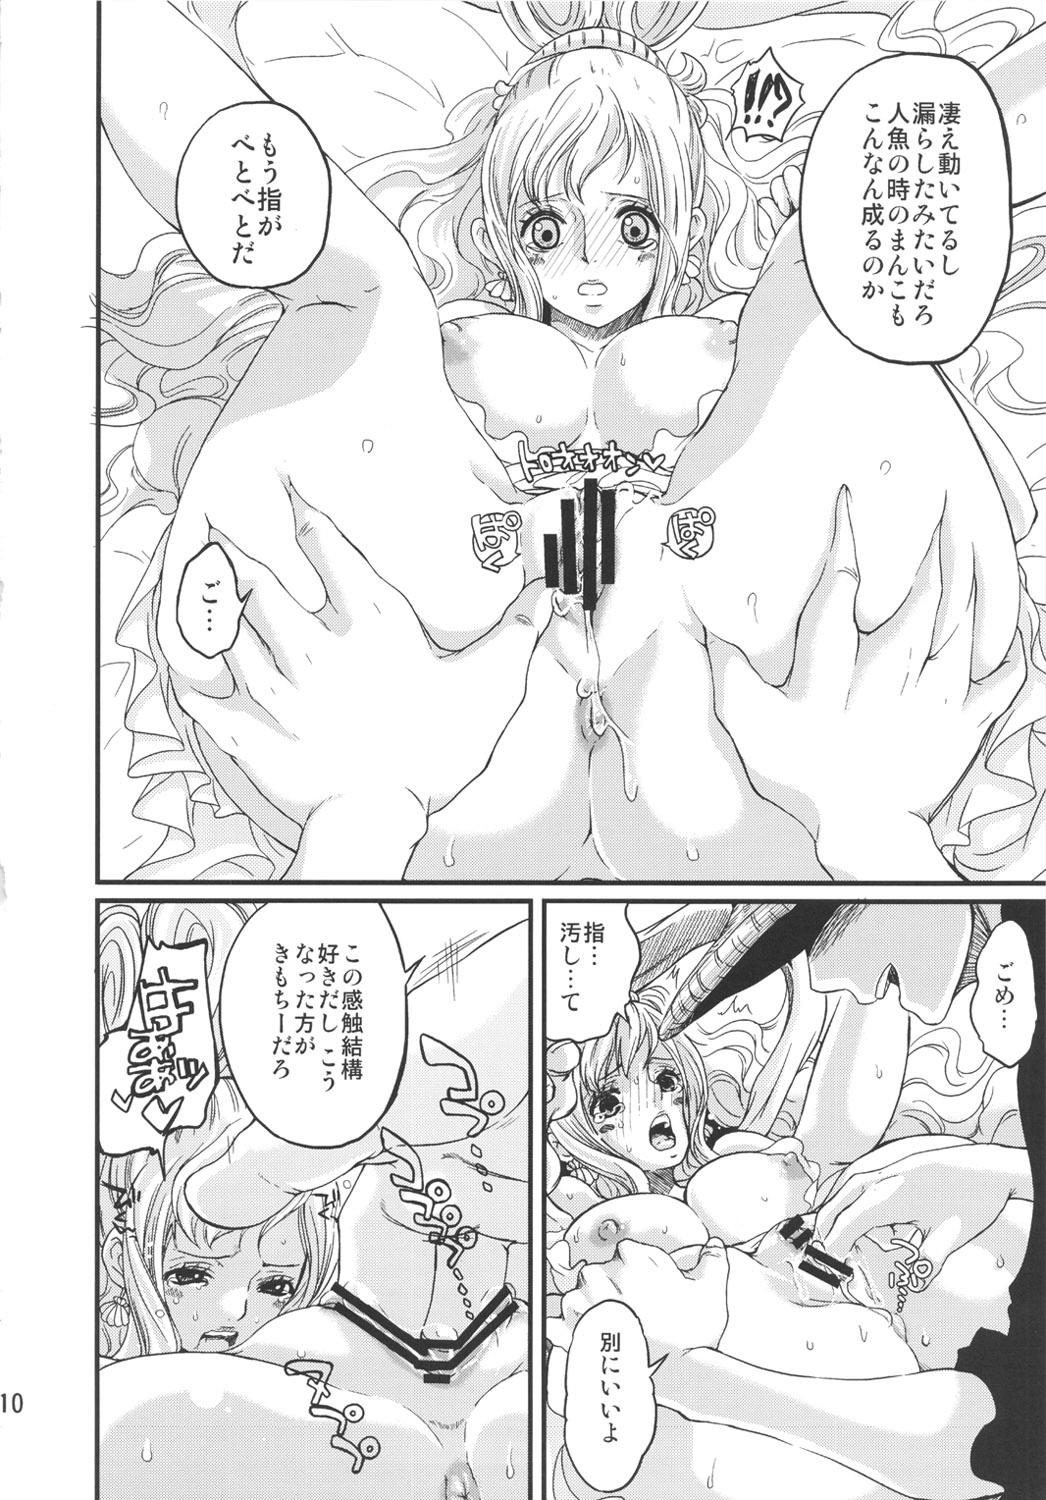 Spa Ningyohime - One piece Caught - Page 10